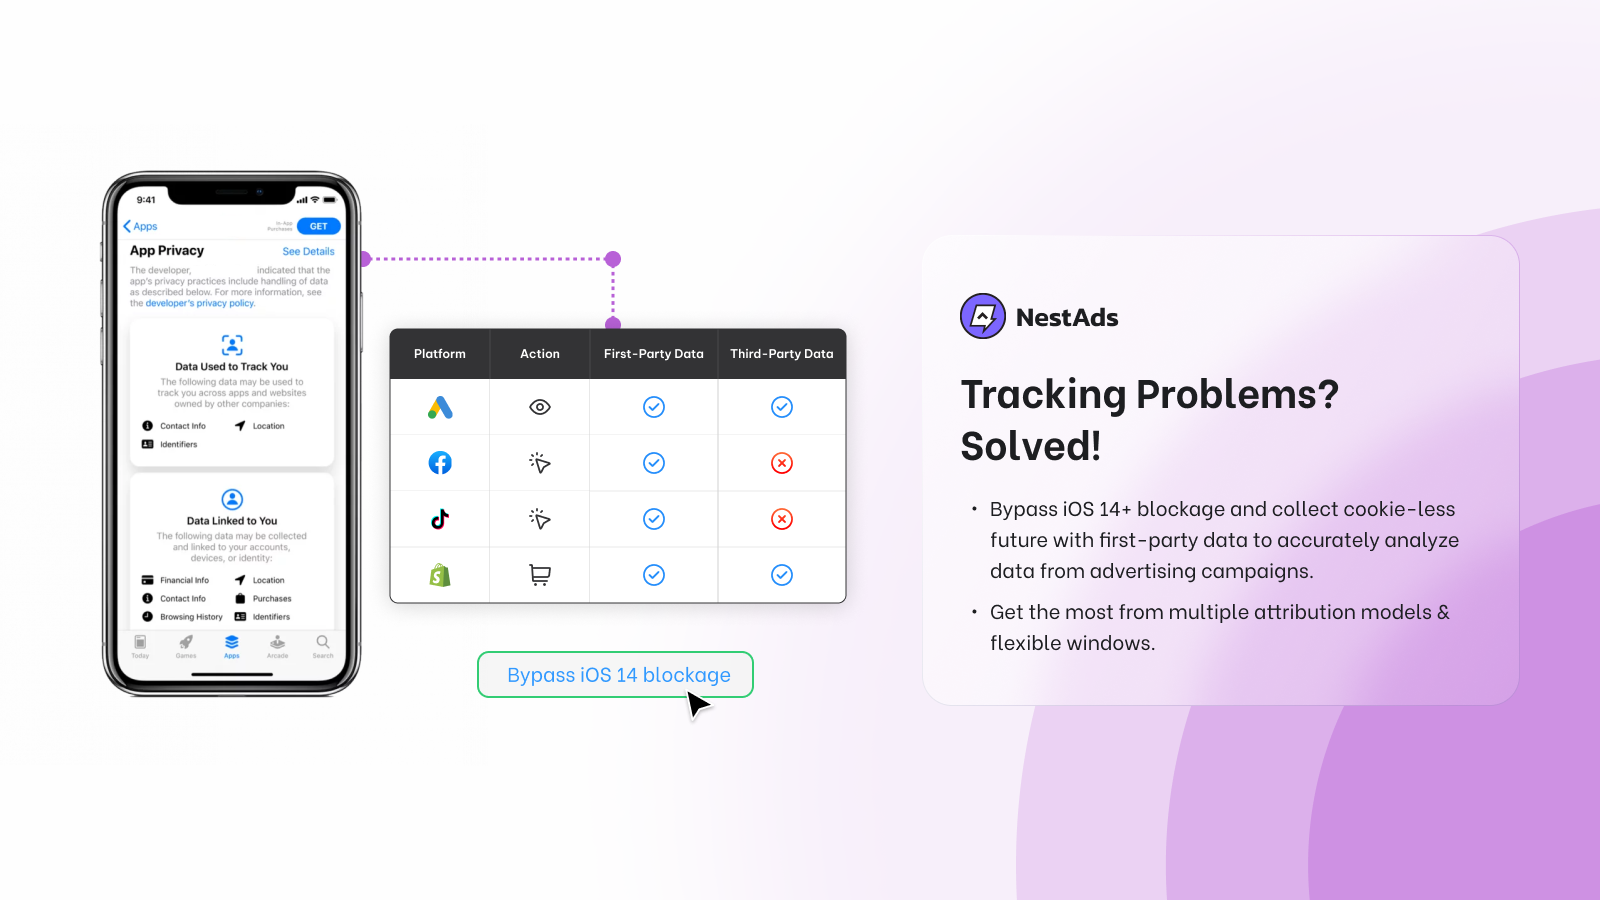 Solve tracking problems with NestAds pixels that bypass iOS 14